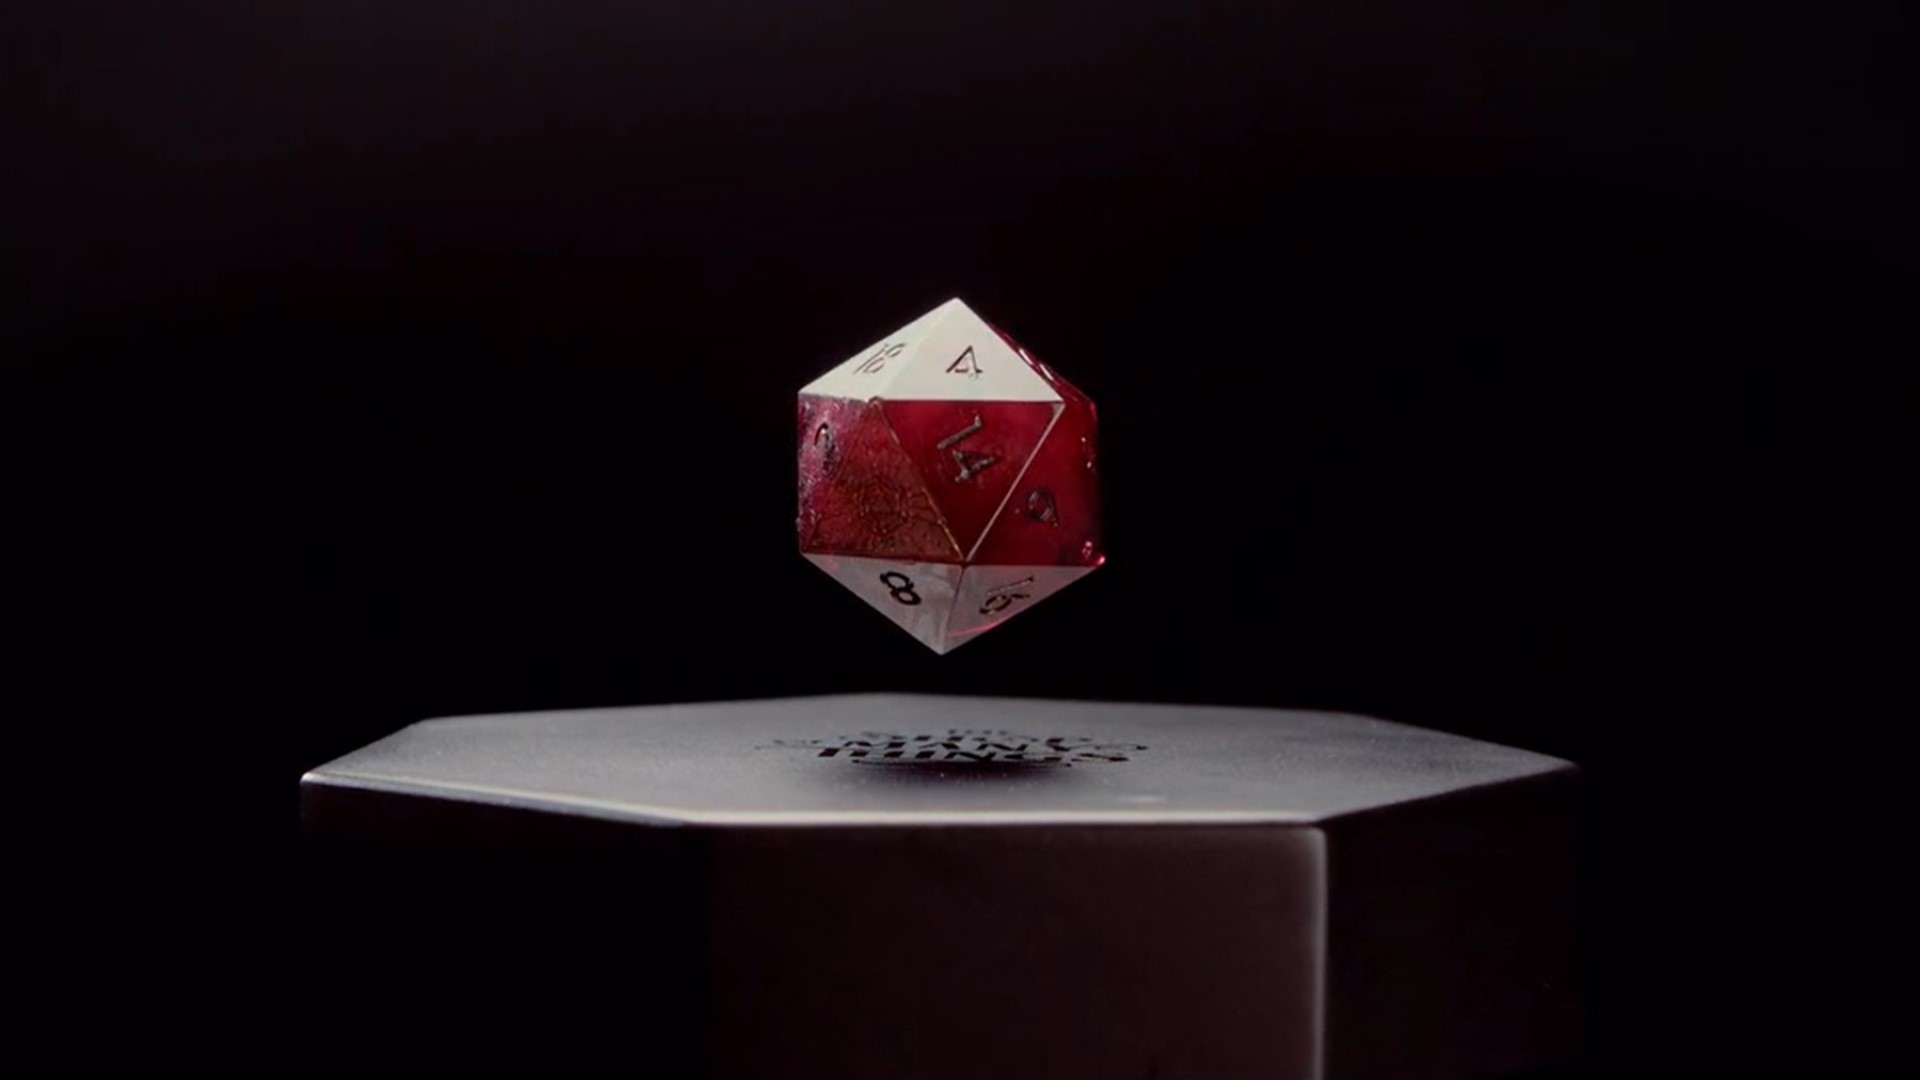 DnD dice rolls not flying? Try a floating D20